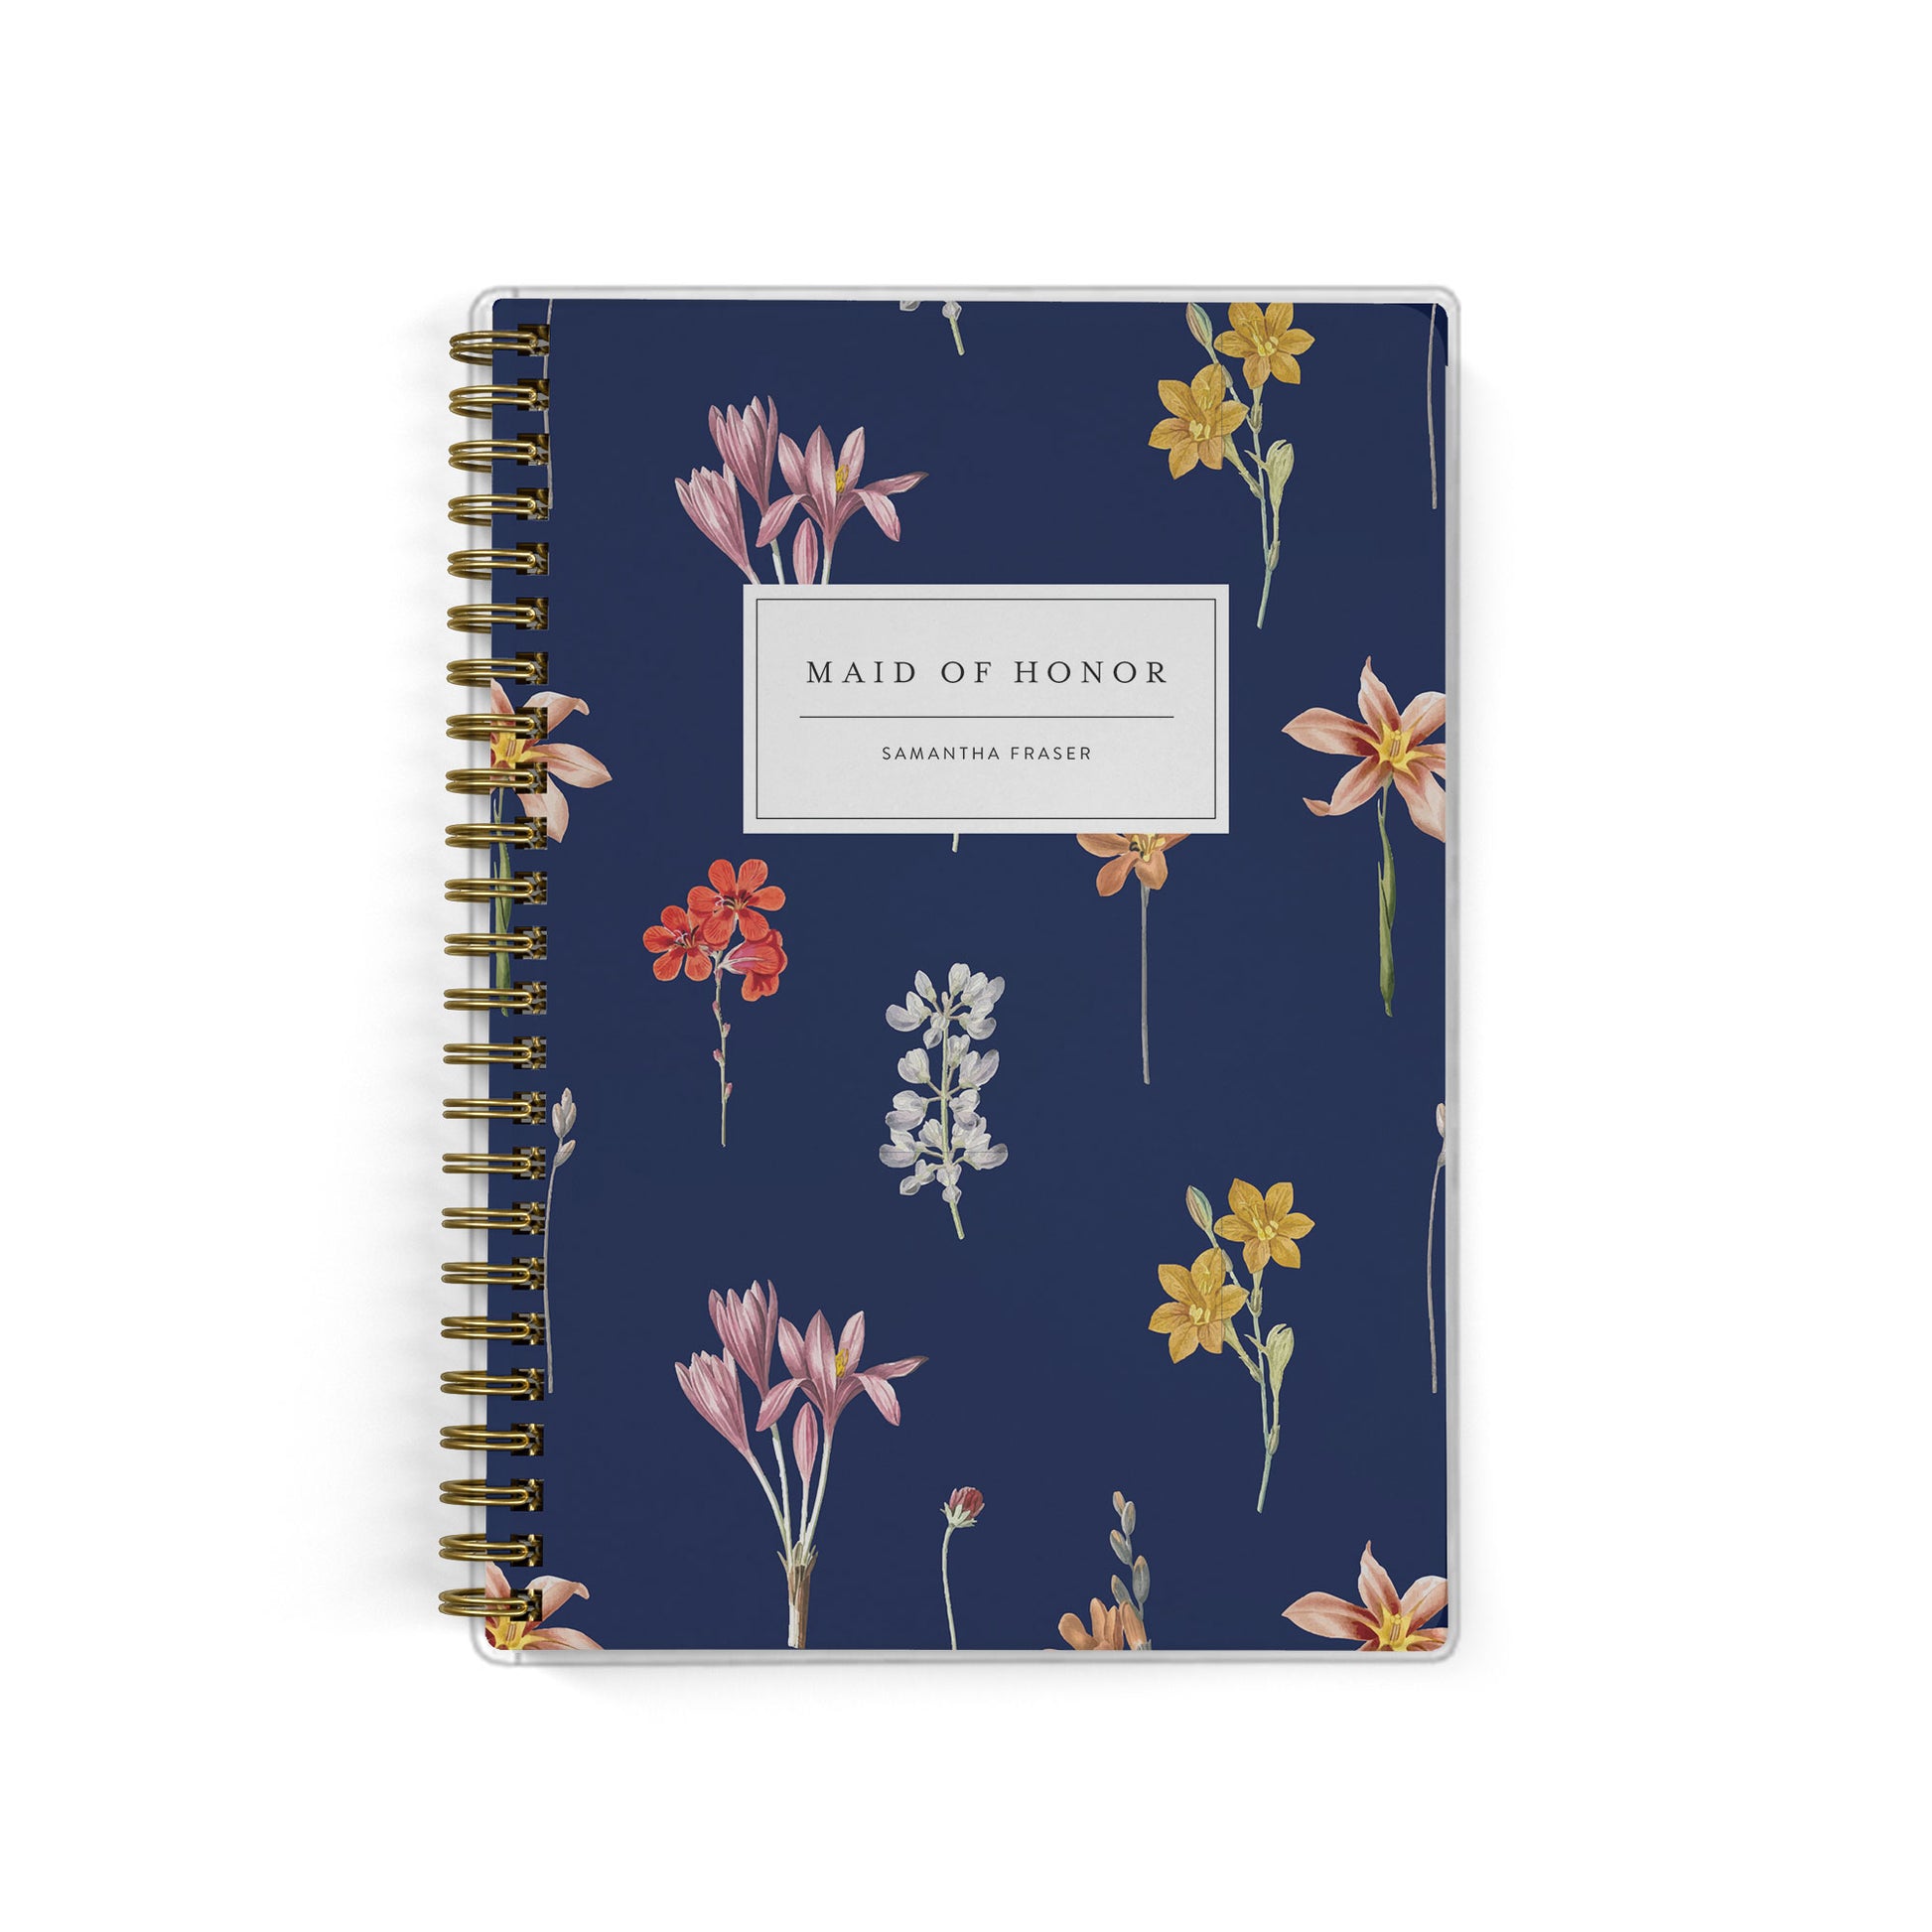 Our exclusive maid of honor planners are the perfect gift for your best friend, shown in a dark floral botanical print